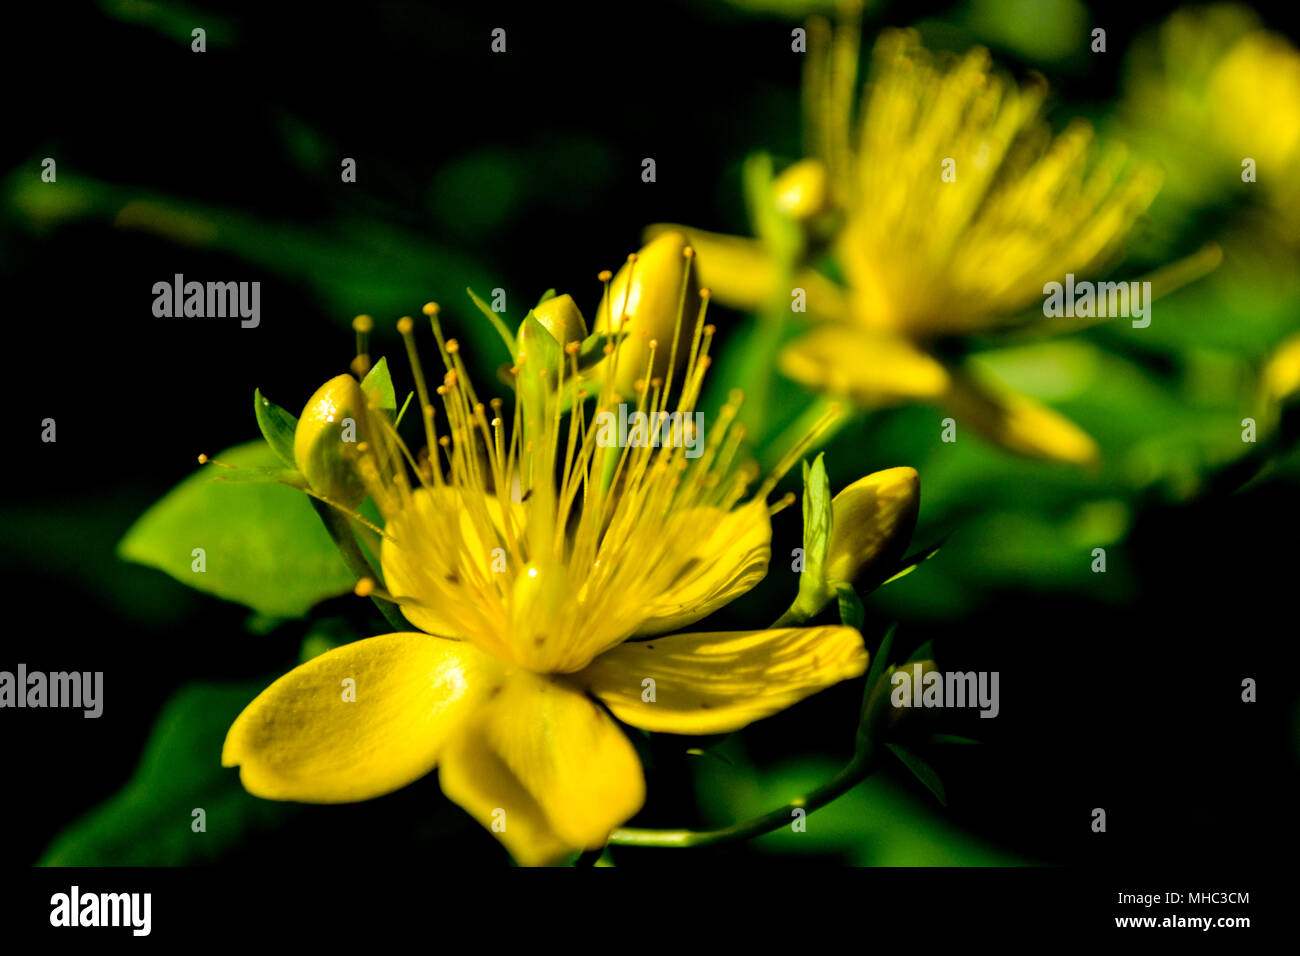 A close up of a St John's Wort flower head showing the beautiful yellow colour of the petals and the high detail of the flower head Stock Photo